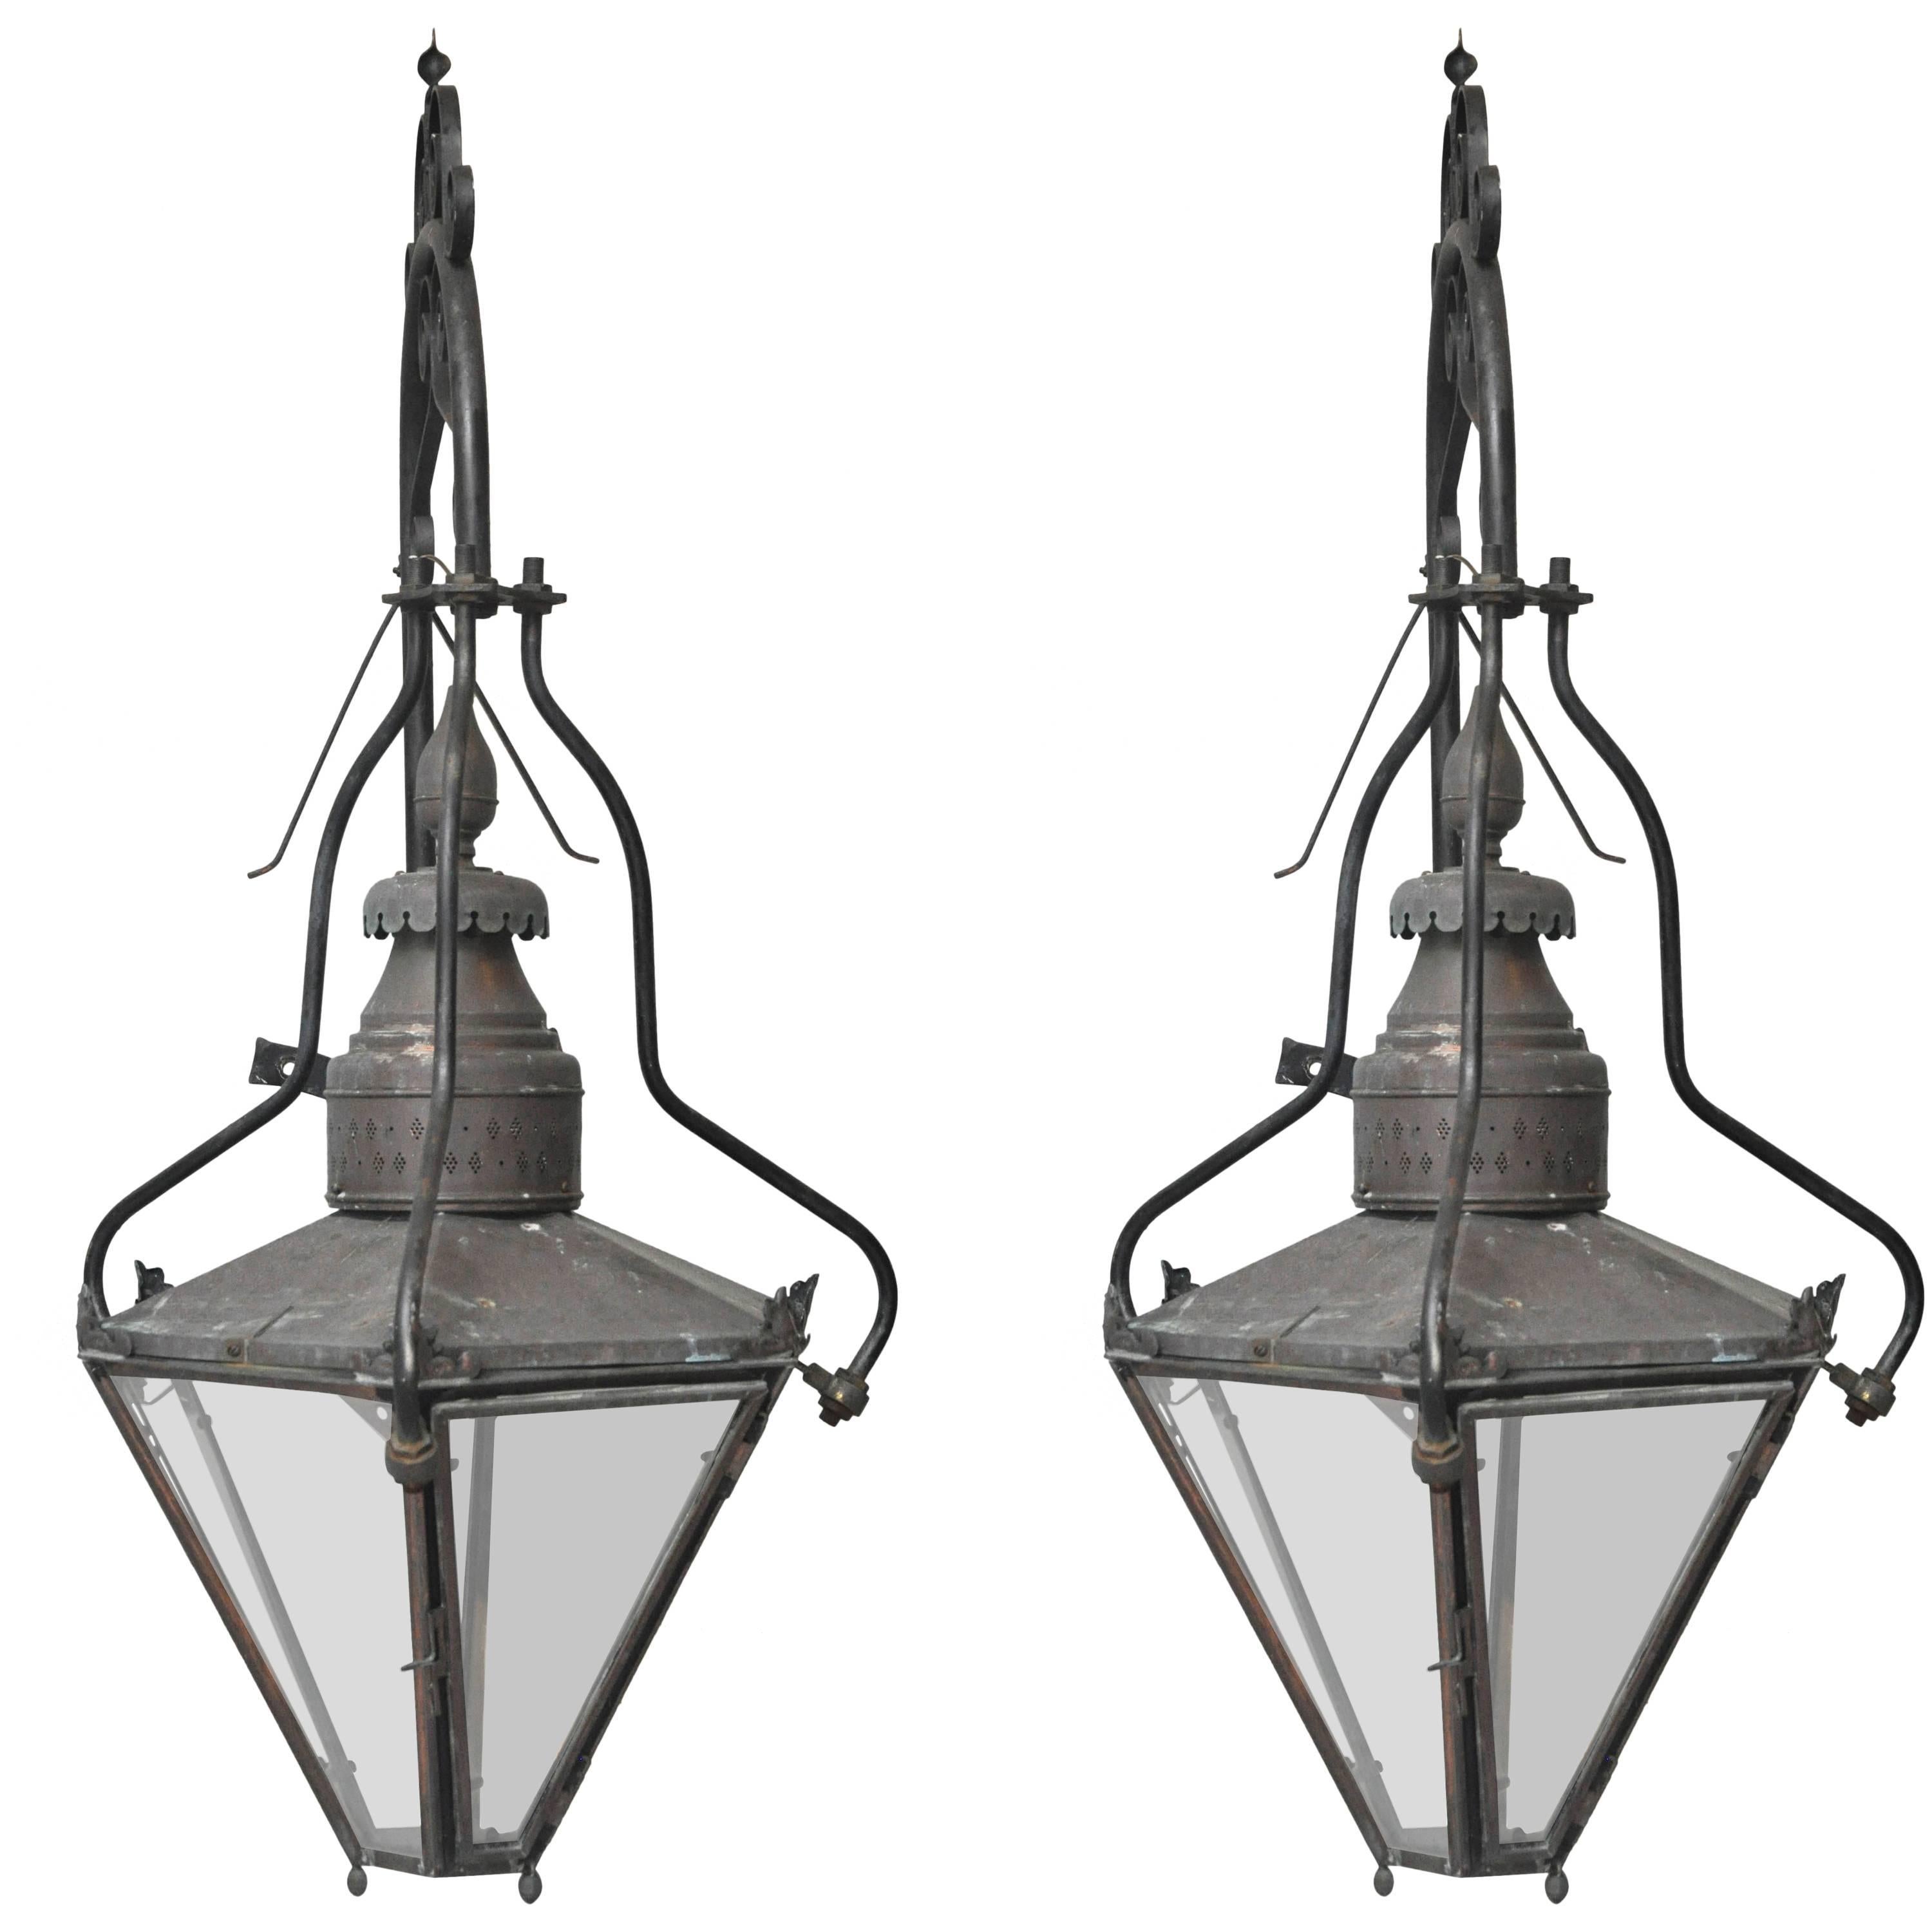 Pair of one of a kind Monumental English Outdoor Wall Light Sconces, originally gas converted to electric. Lantern comprised of six glass shades, patinated copper bonnet surmounted with copper circular reticulated vent,  three shapely painted black